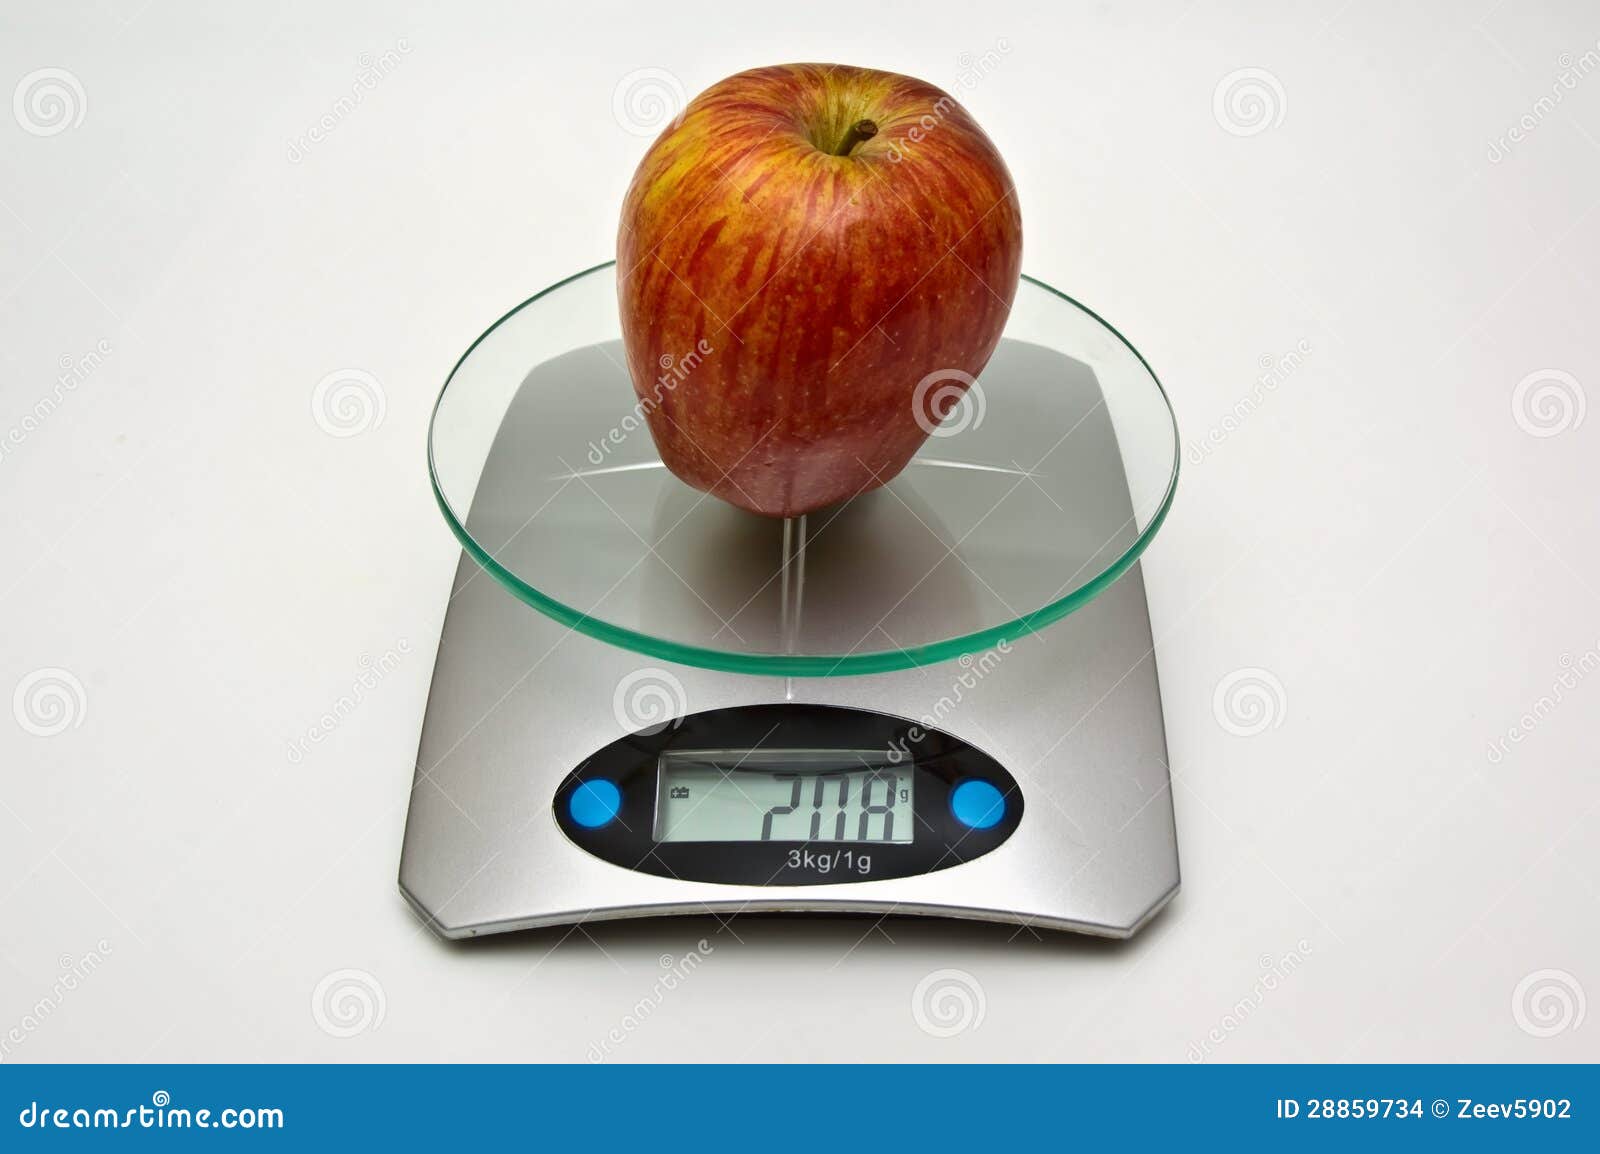 Average Weight of an Apple 